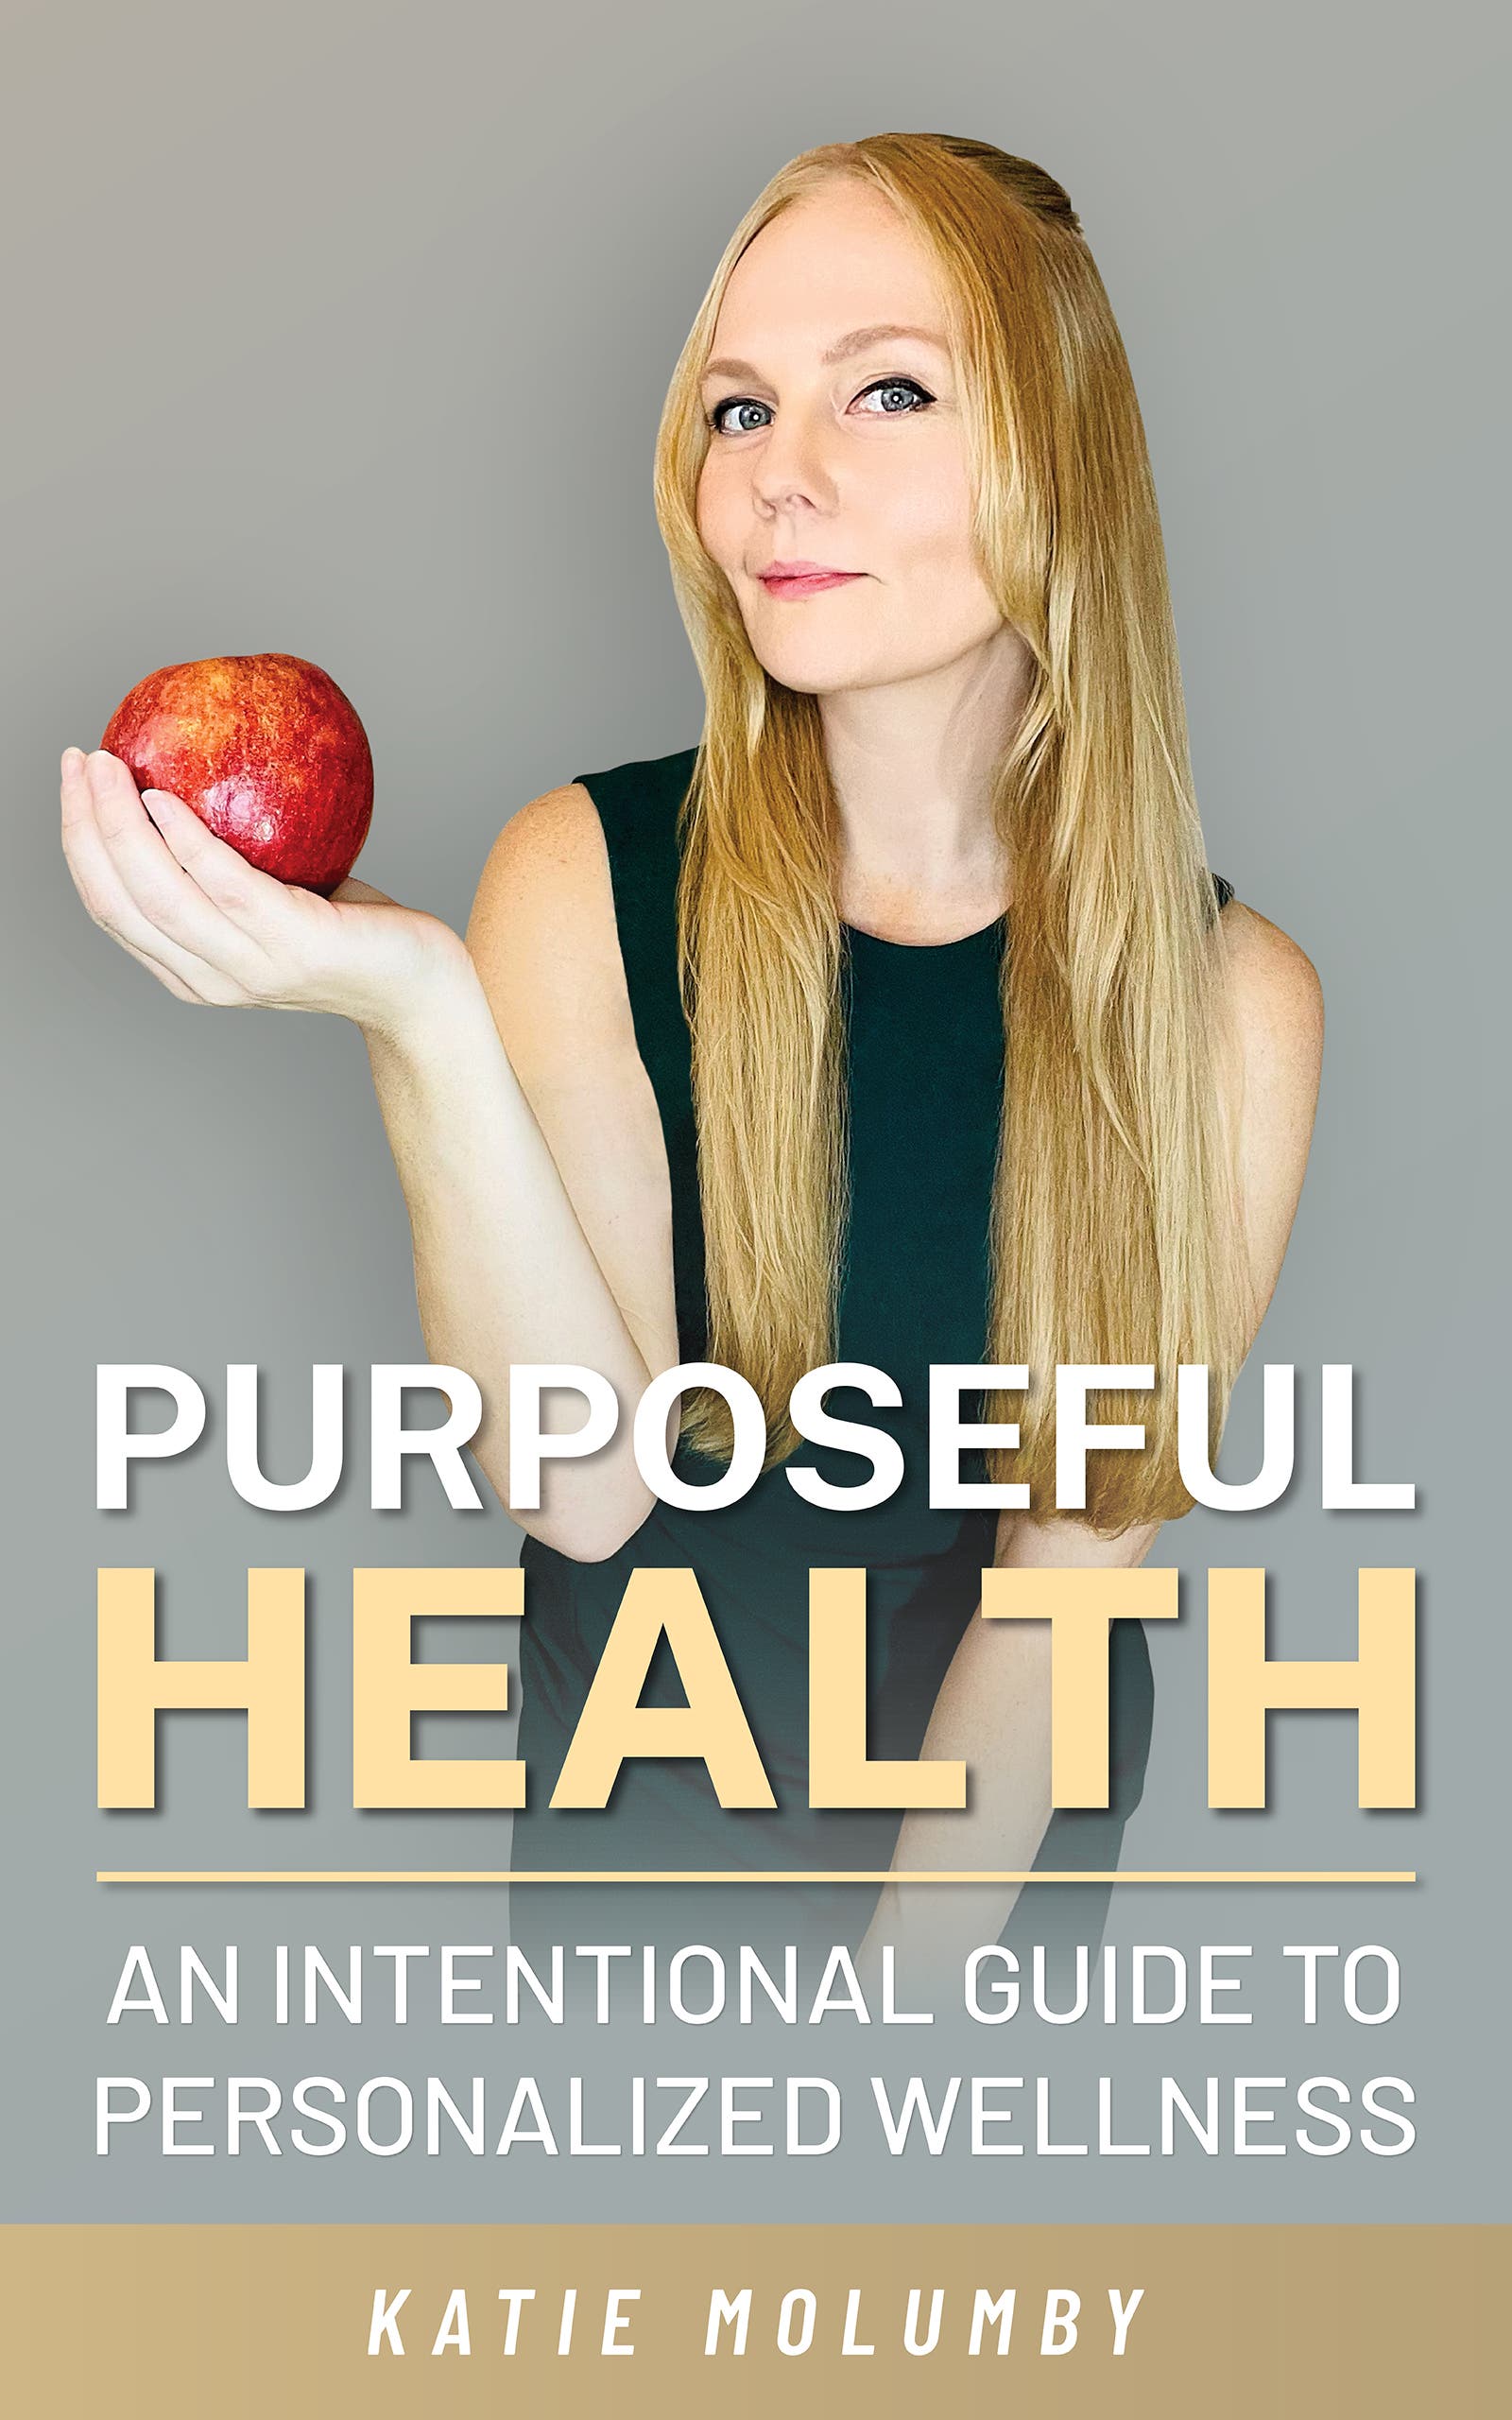 Local Book Launch - Purposeful Health: An Intentional Guide To Personalized Wellness